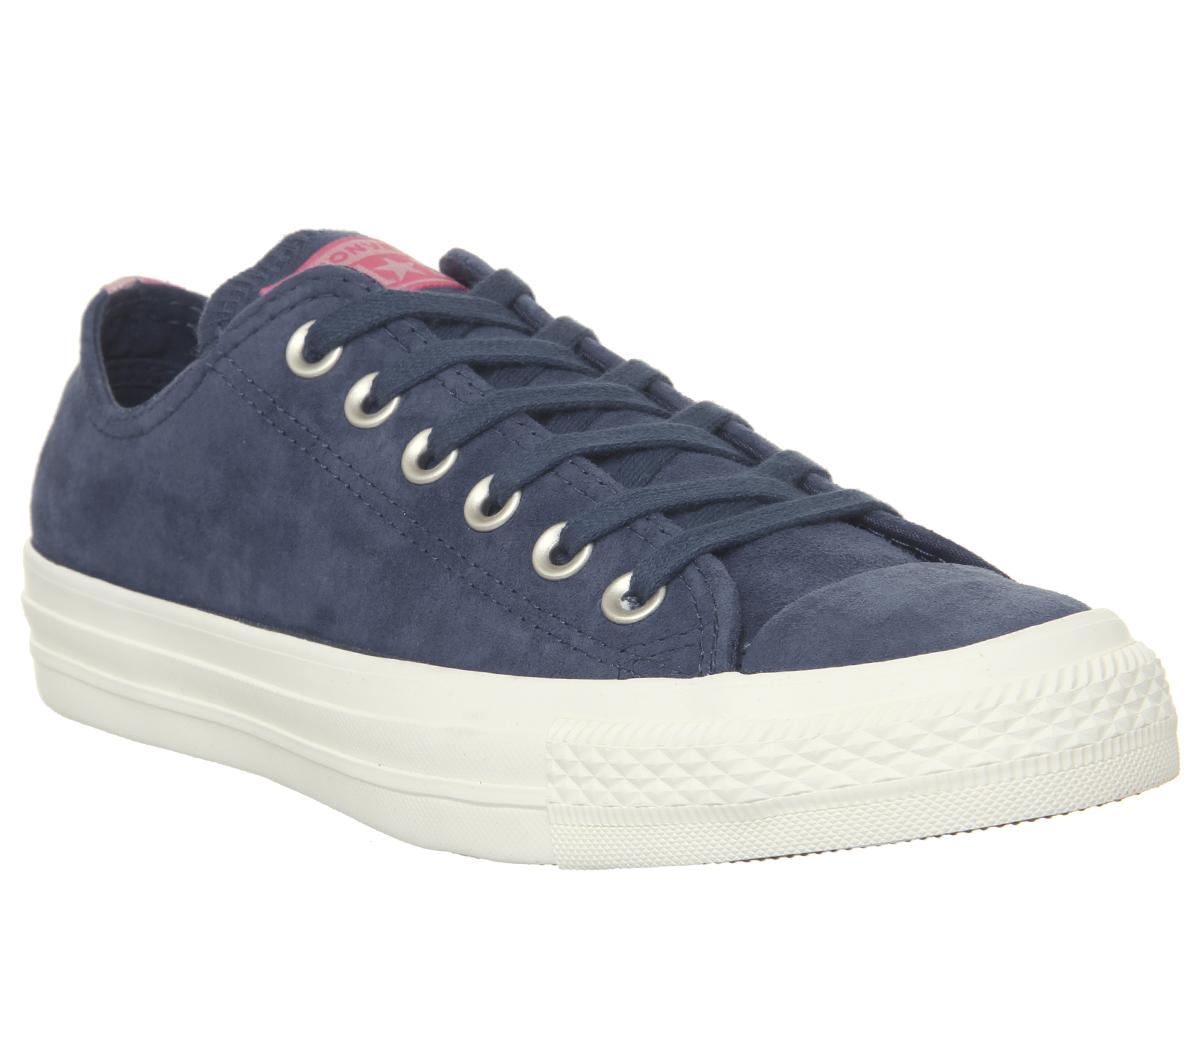 Converse All Star Low Leather Trainers Navy Egret Heel Stripe Exclusive -  Unisex Sports